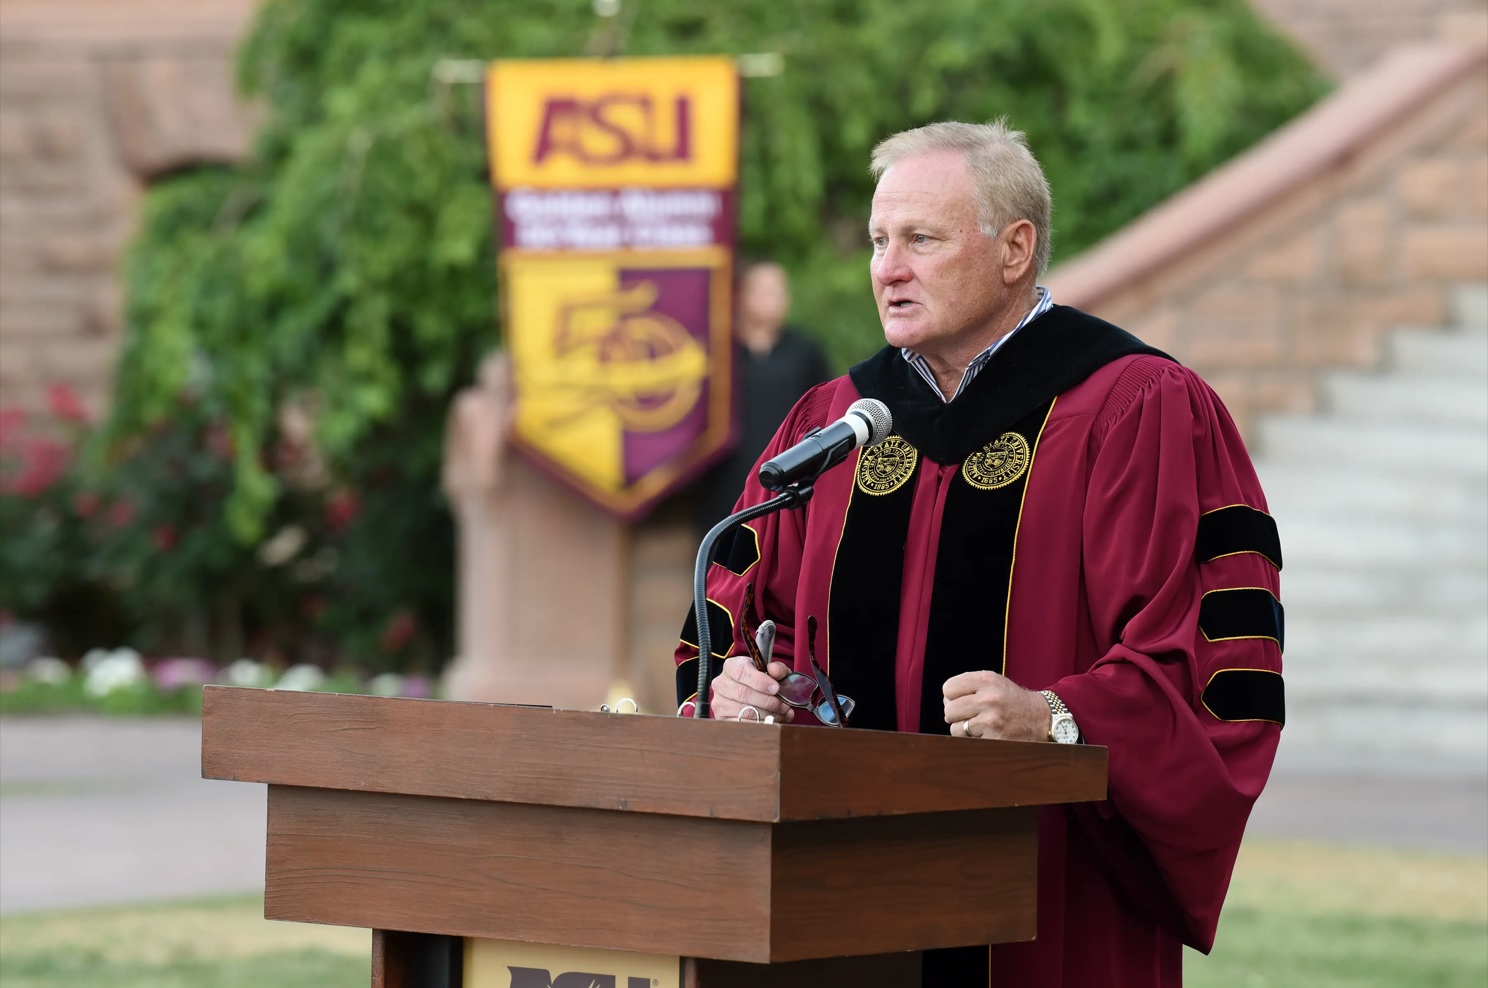 Man wearing graduation regalia standing behind a lectern and speaking into a microphone.